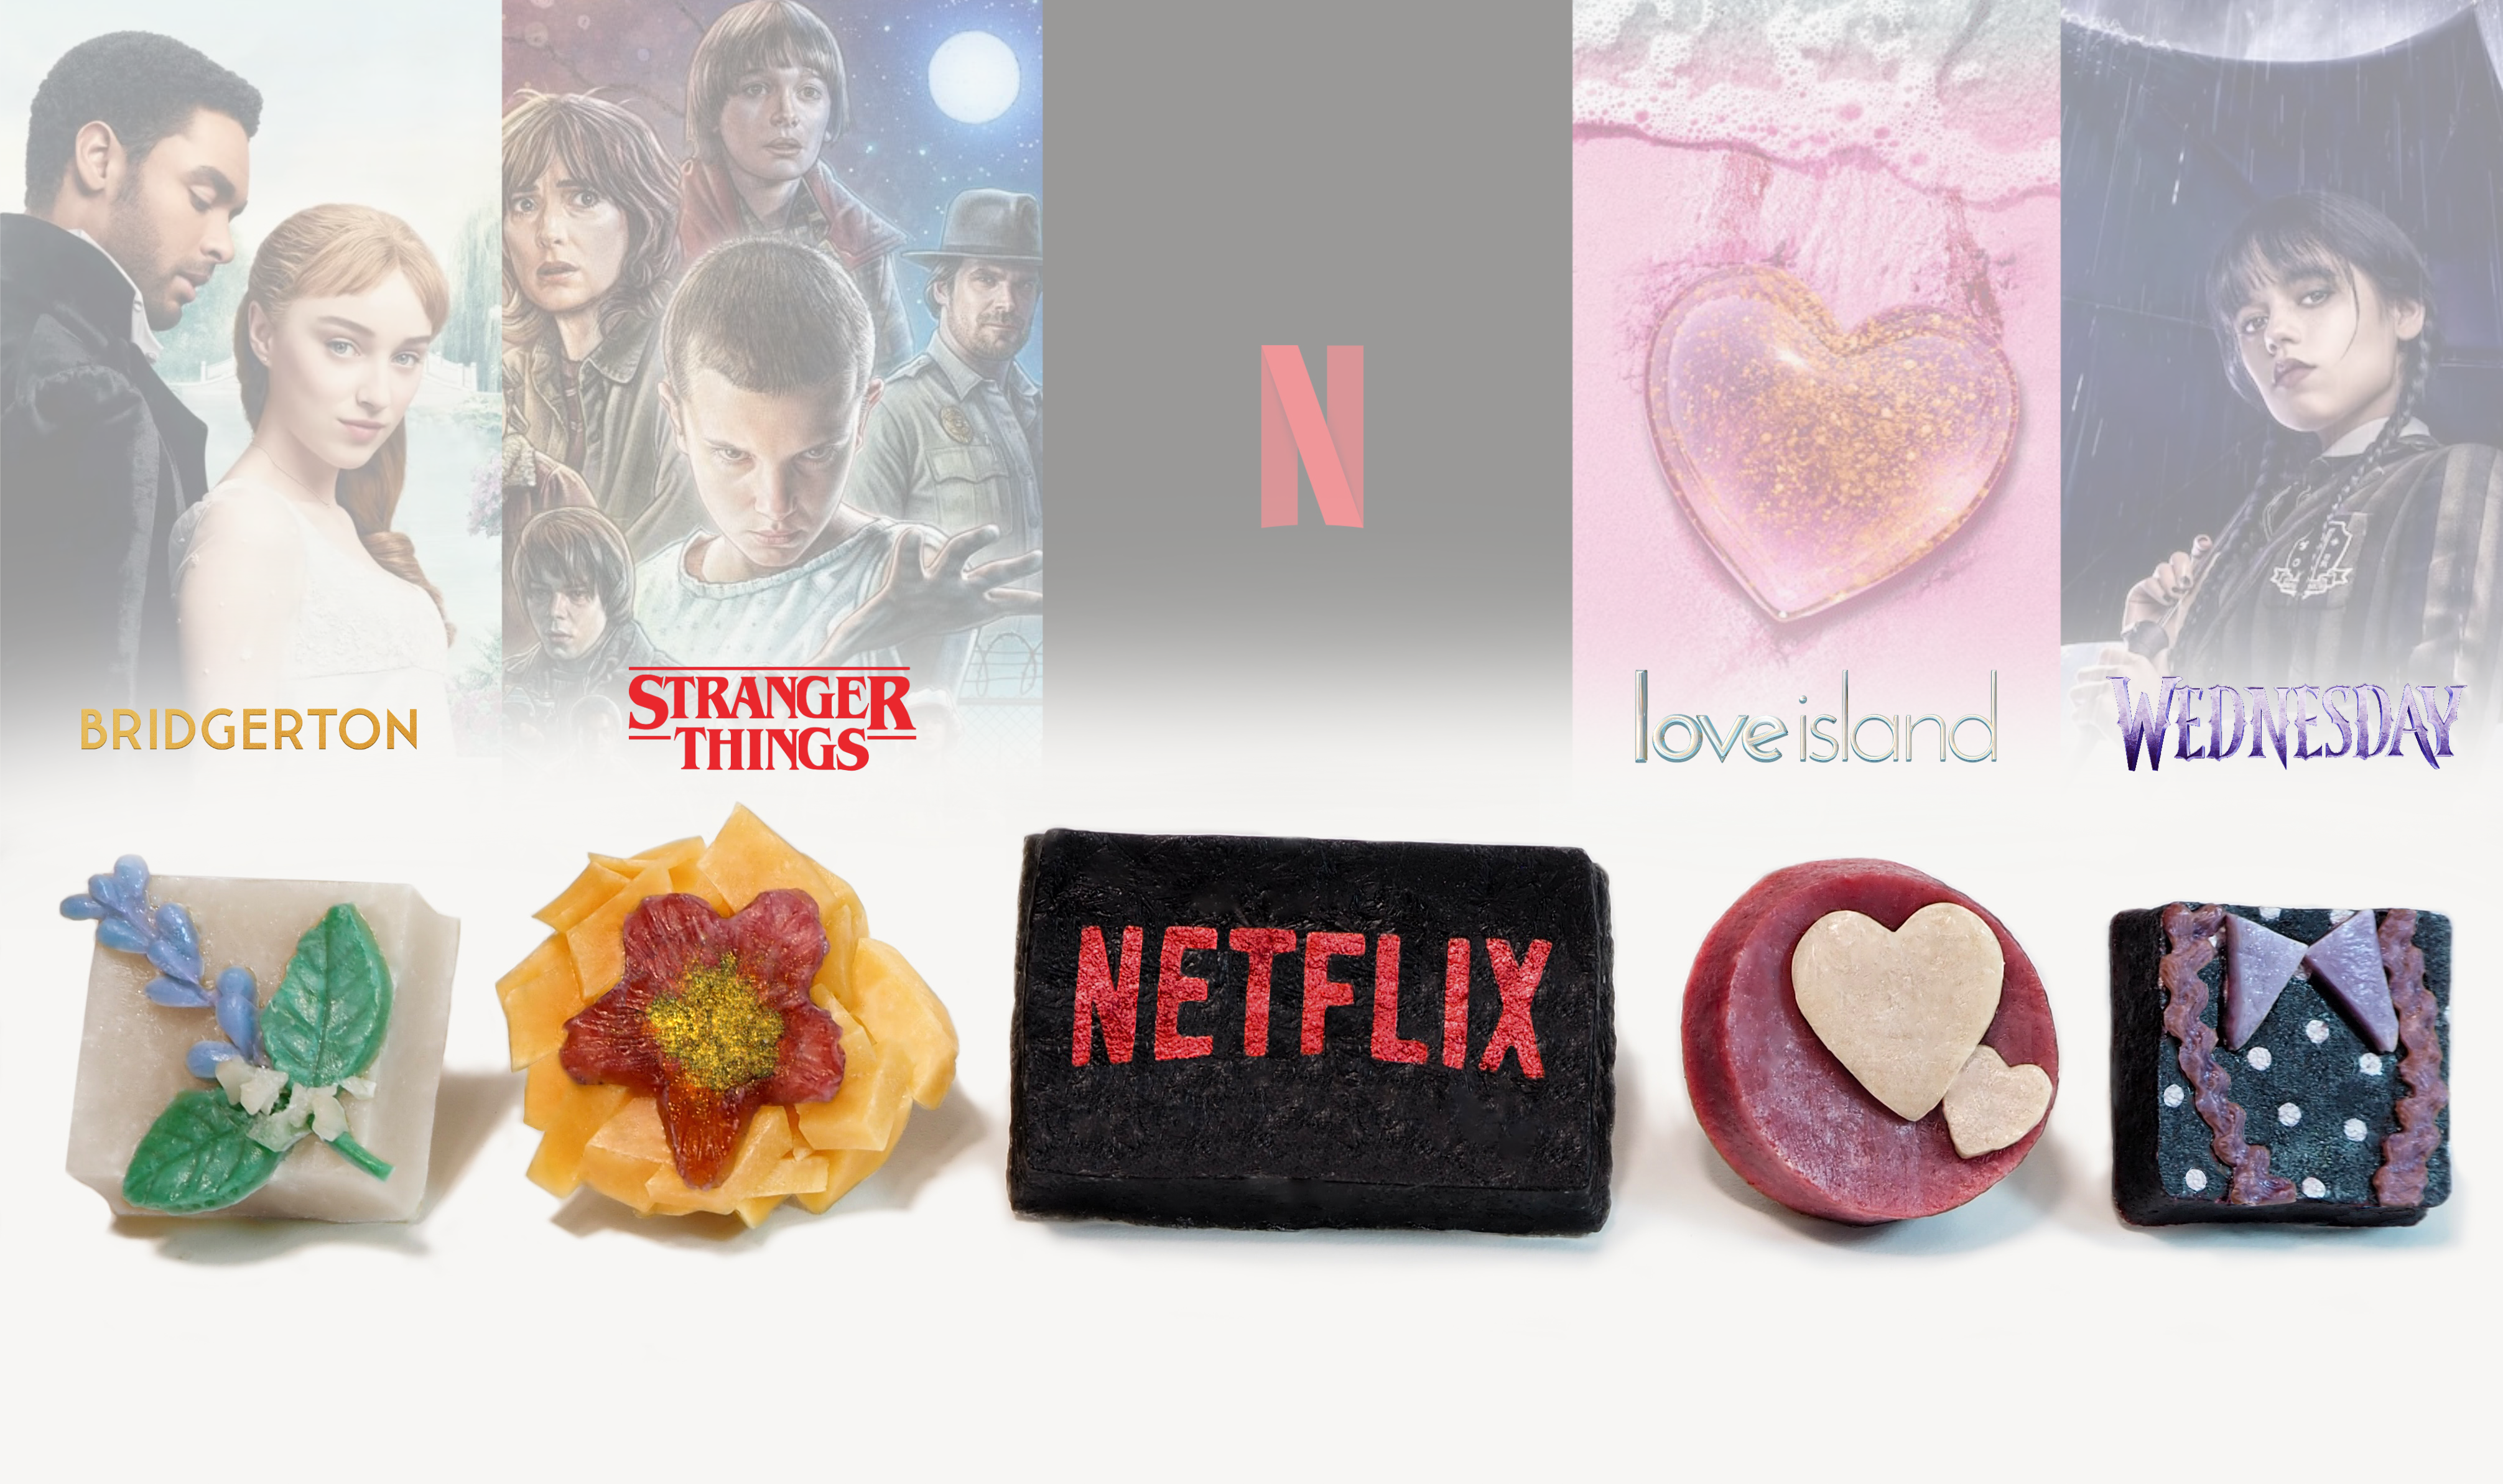 
The image shows a creative display of sweets, each representing a different television show available on Netflix. From left to right, the shows and their corresponding sweets are: 